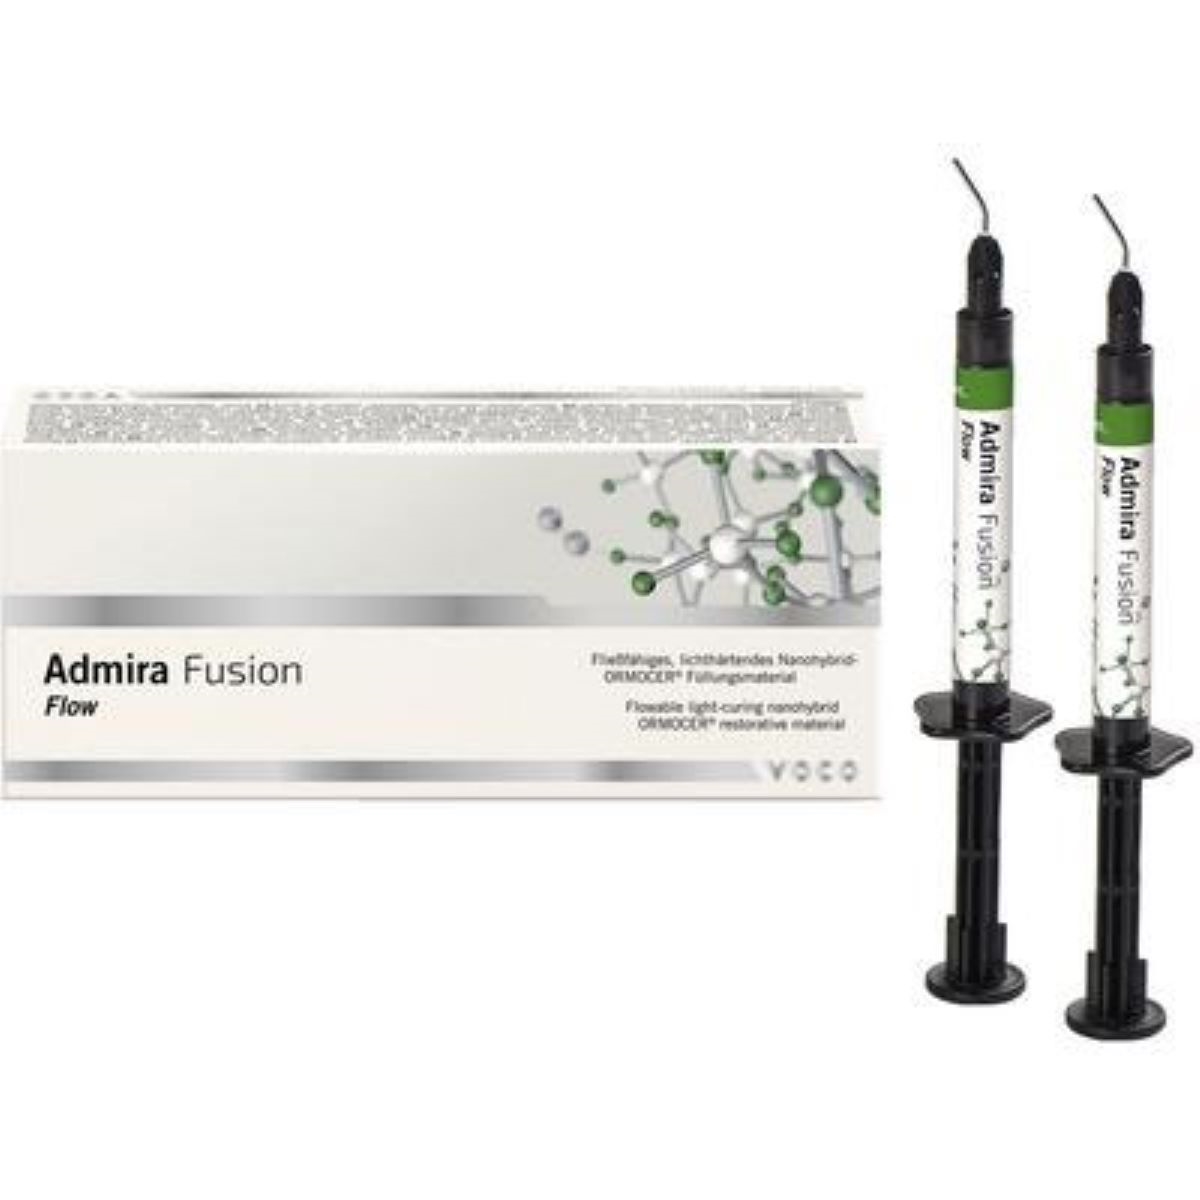 Admira Fusion Flow A2, 2 x 2 gm Syringes. Flowable, all ceramic-based  universal